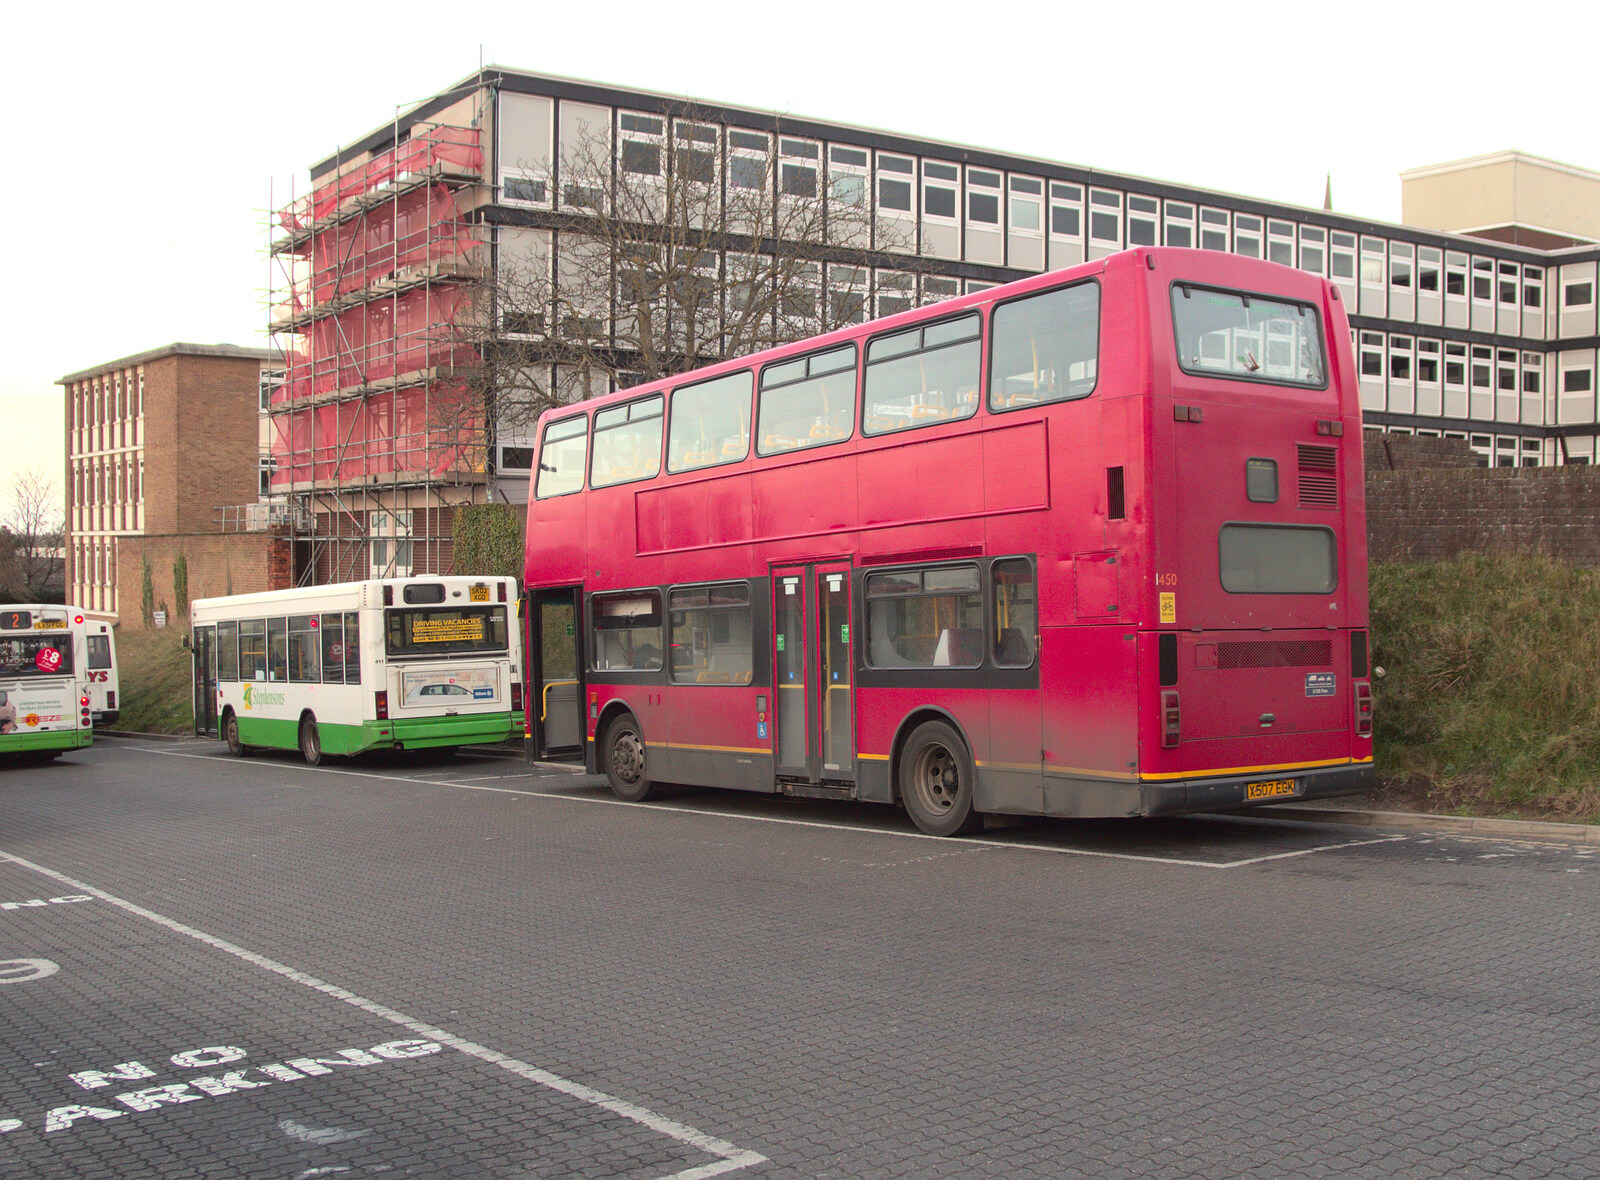 A 15-year-old bus from A Trip to Abbey Gardens, Bury St. Edmunds, Suffolk - 20th December 2014